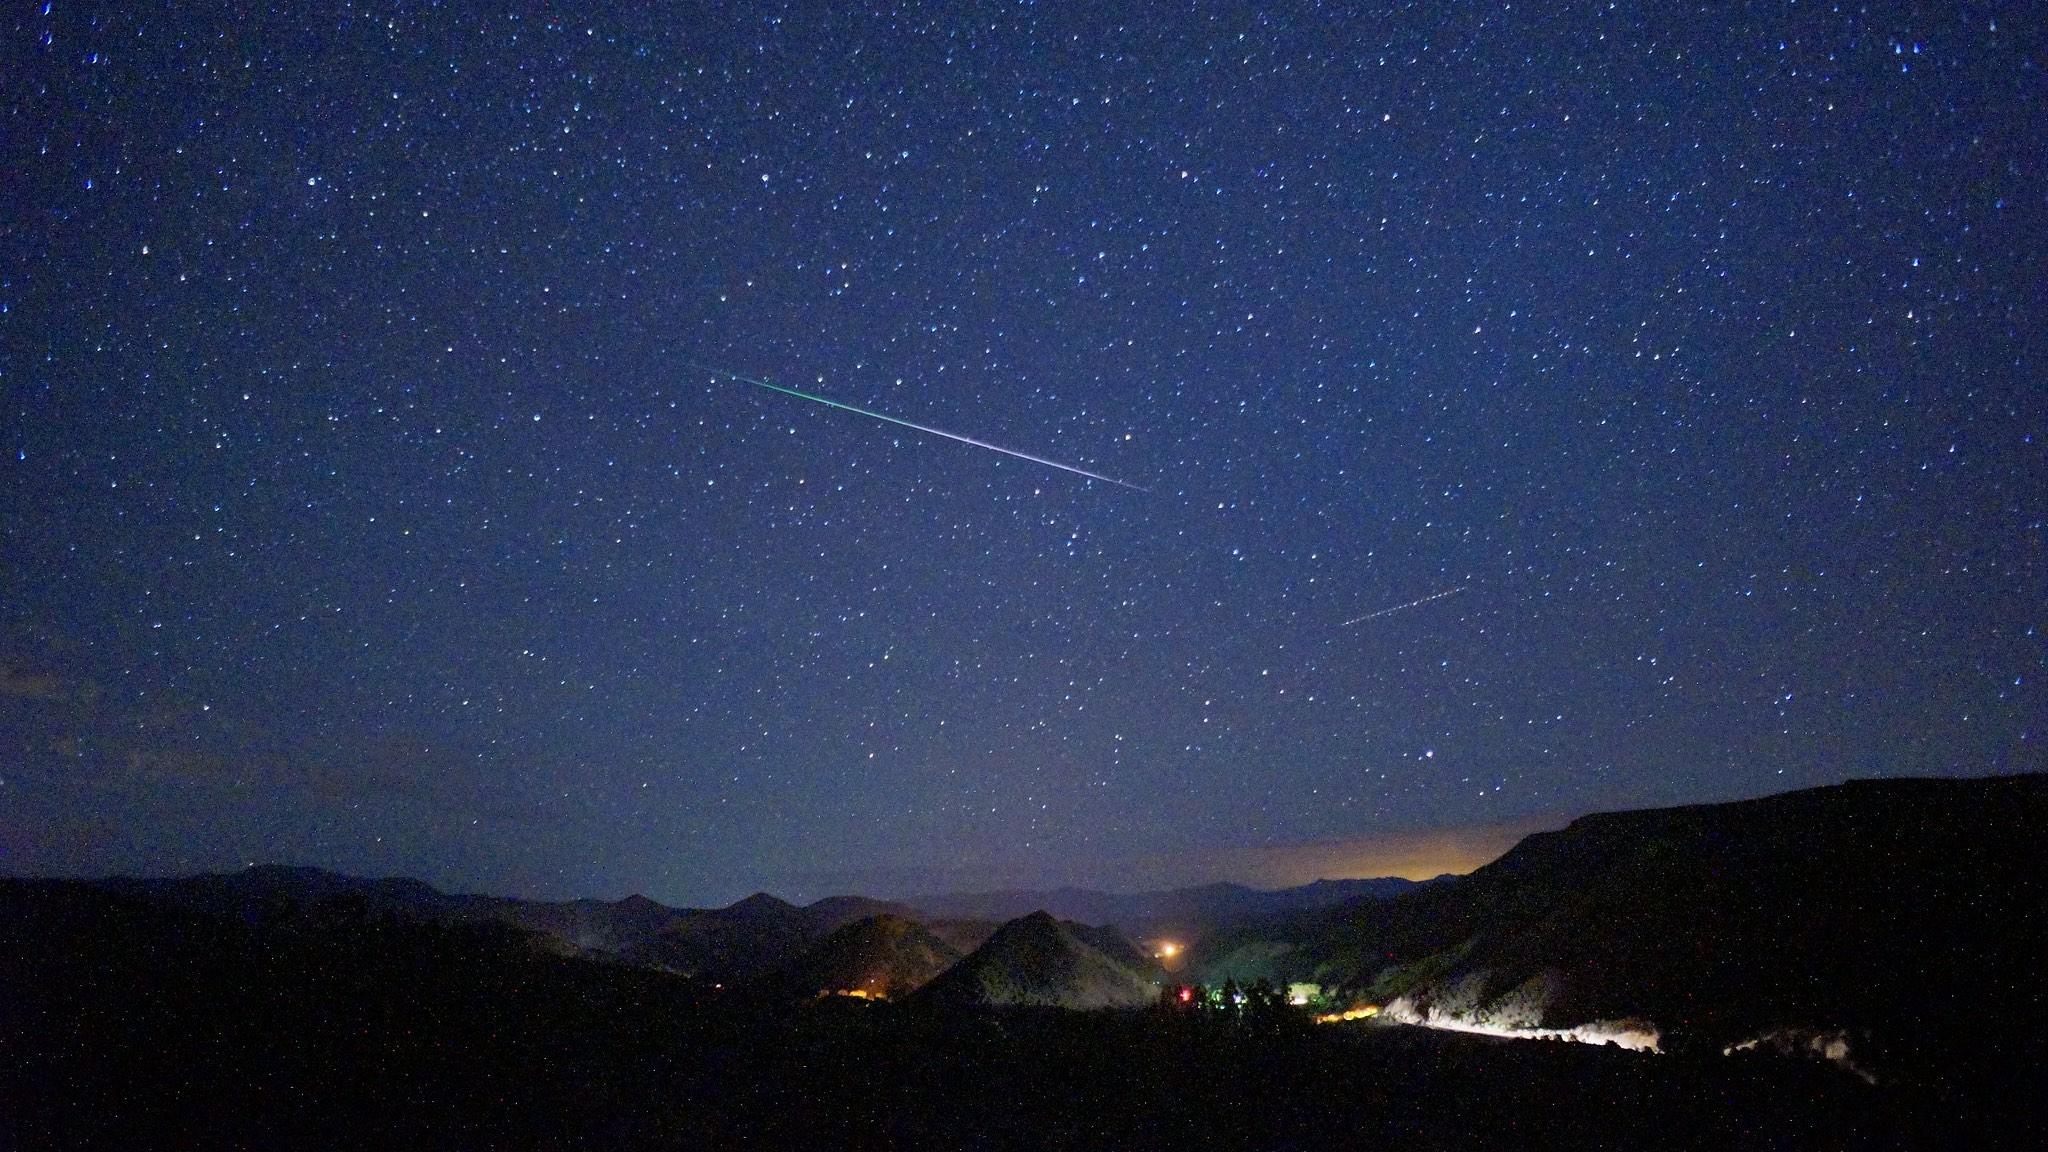 The Perseid meteor shower will peak Tuesday night into Wednesday morning. (Mike Lewinski / Flickr)